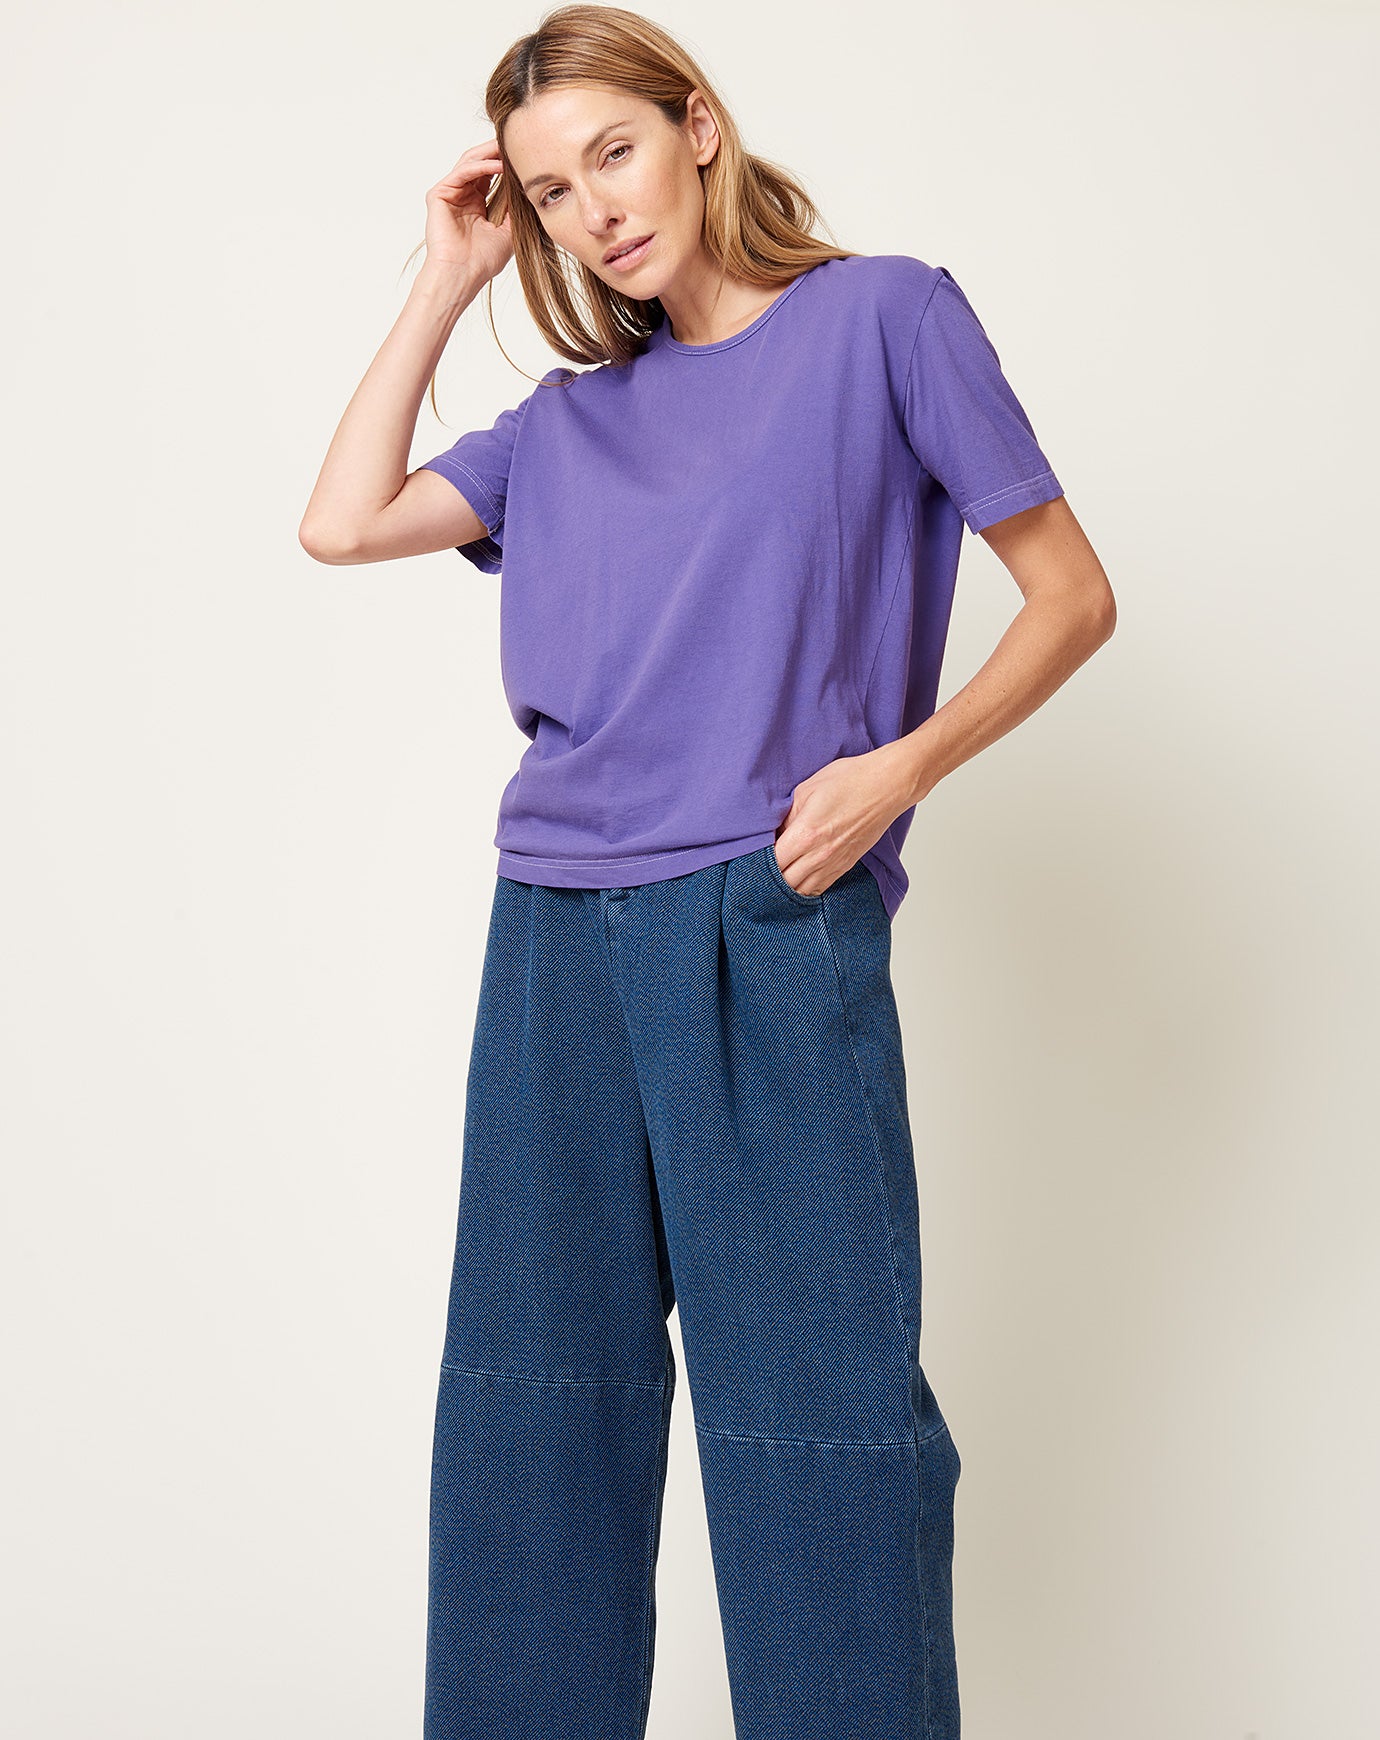 Anntian Edgy T Shirt in Garment Dyed Purple